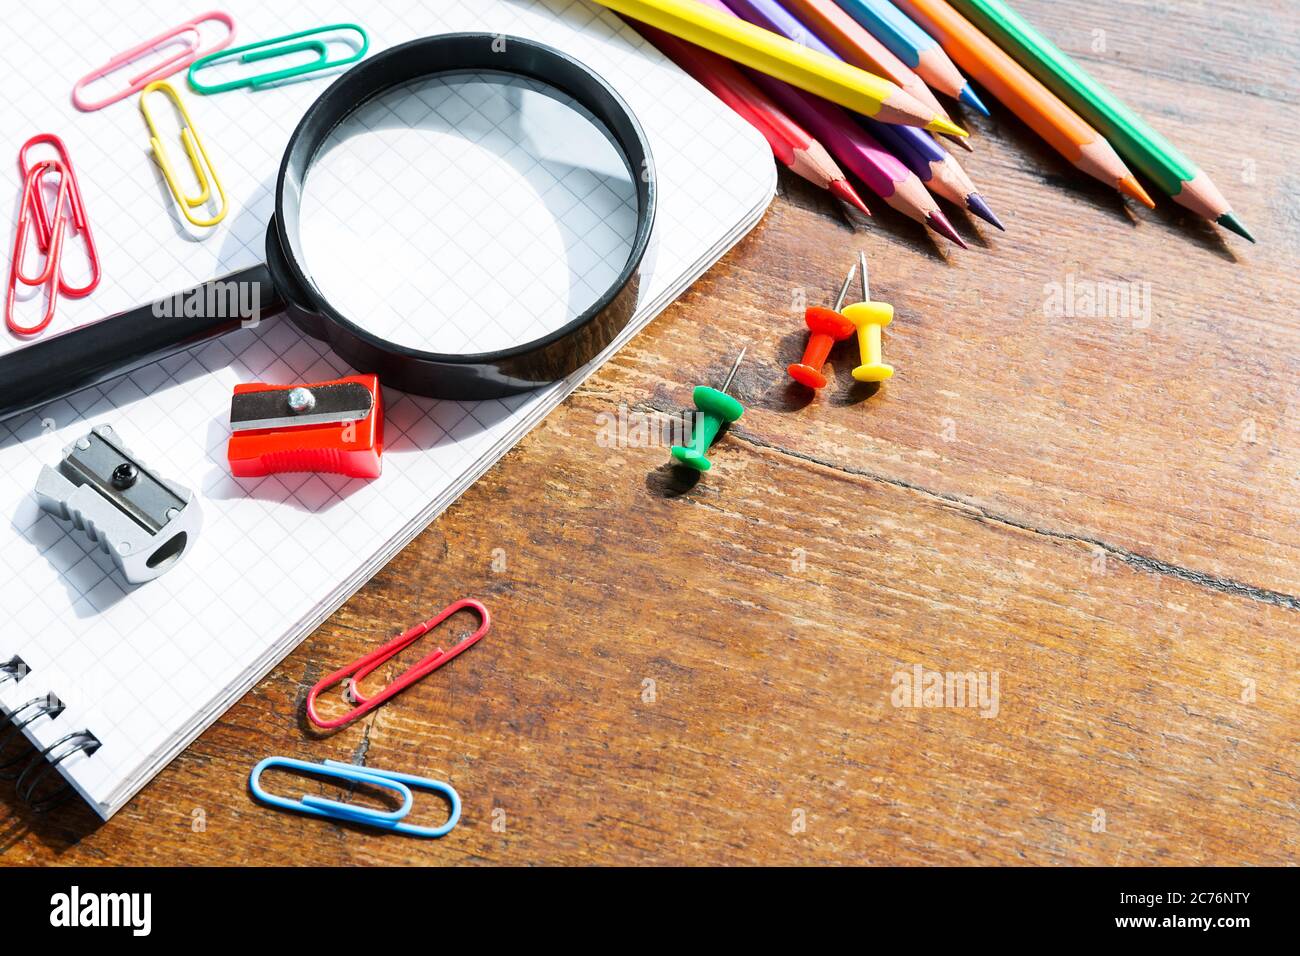 https://c8.alamy.com/comp/2C76NTY/back-to-school-note-book-pencils-loupe-green-apple-on-wooden-table-2C76NTY.jpg